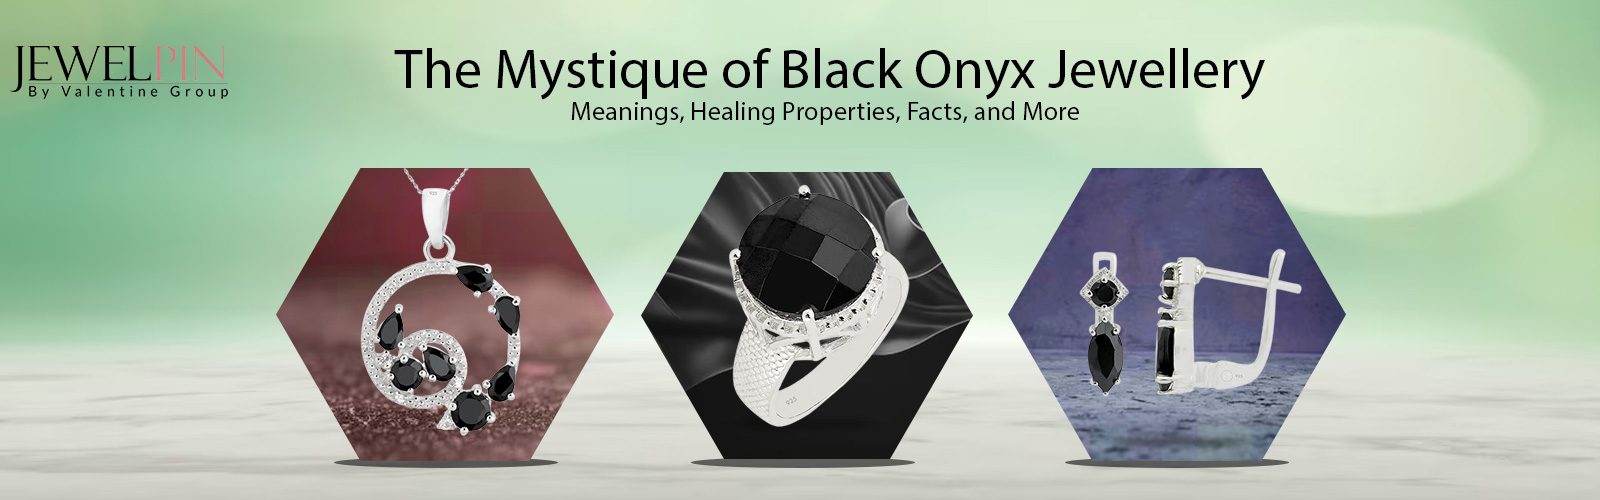 the mystique of black onyx jewellery meanings healing properties facts and more